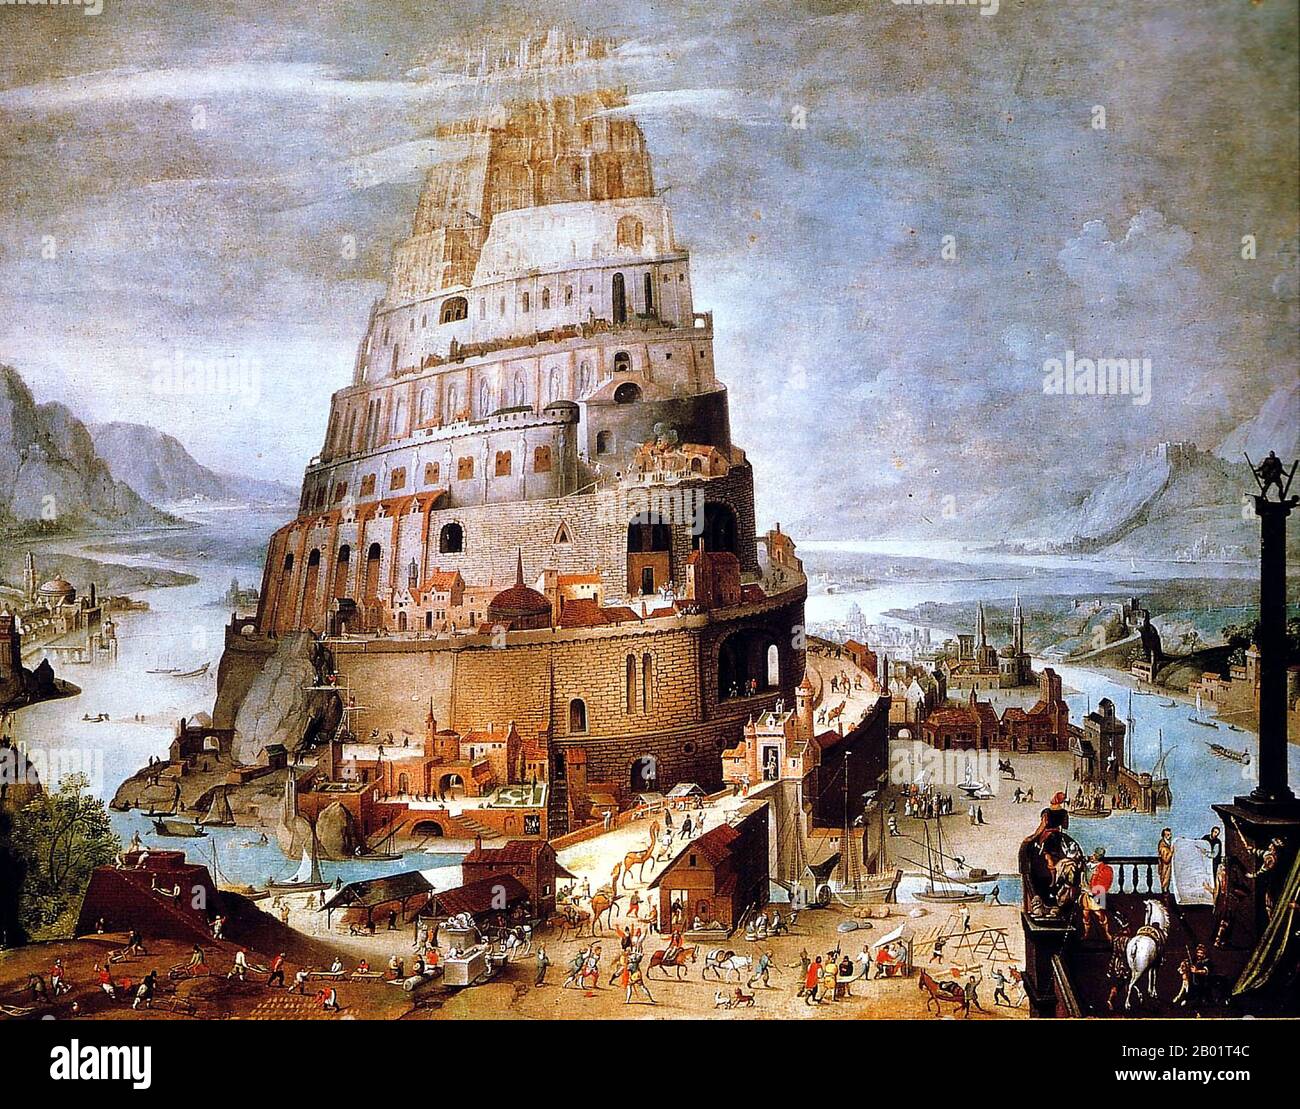 Belgium/Iraq/Mesopotamia: 'The Building of the Tower of Babel'. Oil on panel painting by Abel Grimmer (1570-1619), 17th century.  The Tower of Babel, according to the Book of Genesis, was an enormous tower built in the plain of Shinar.  According to the biblical account, a united humanity of the generations following the Great Flood, speaking a single language and migrating from the east, came to the land of Shinar, where they resolved to build a city with a tower 'with its top in the heavens...lest we be scattered abroad upon the face of the Earth'. Stock Photo